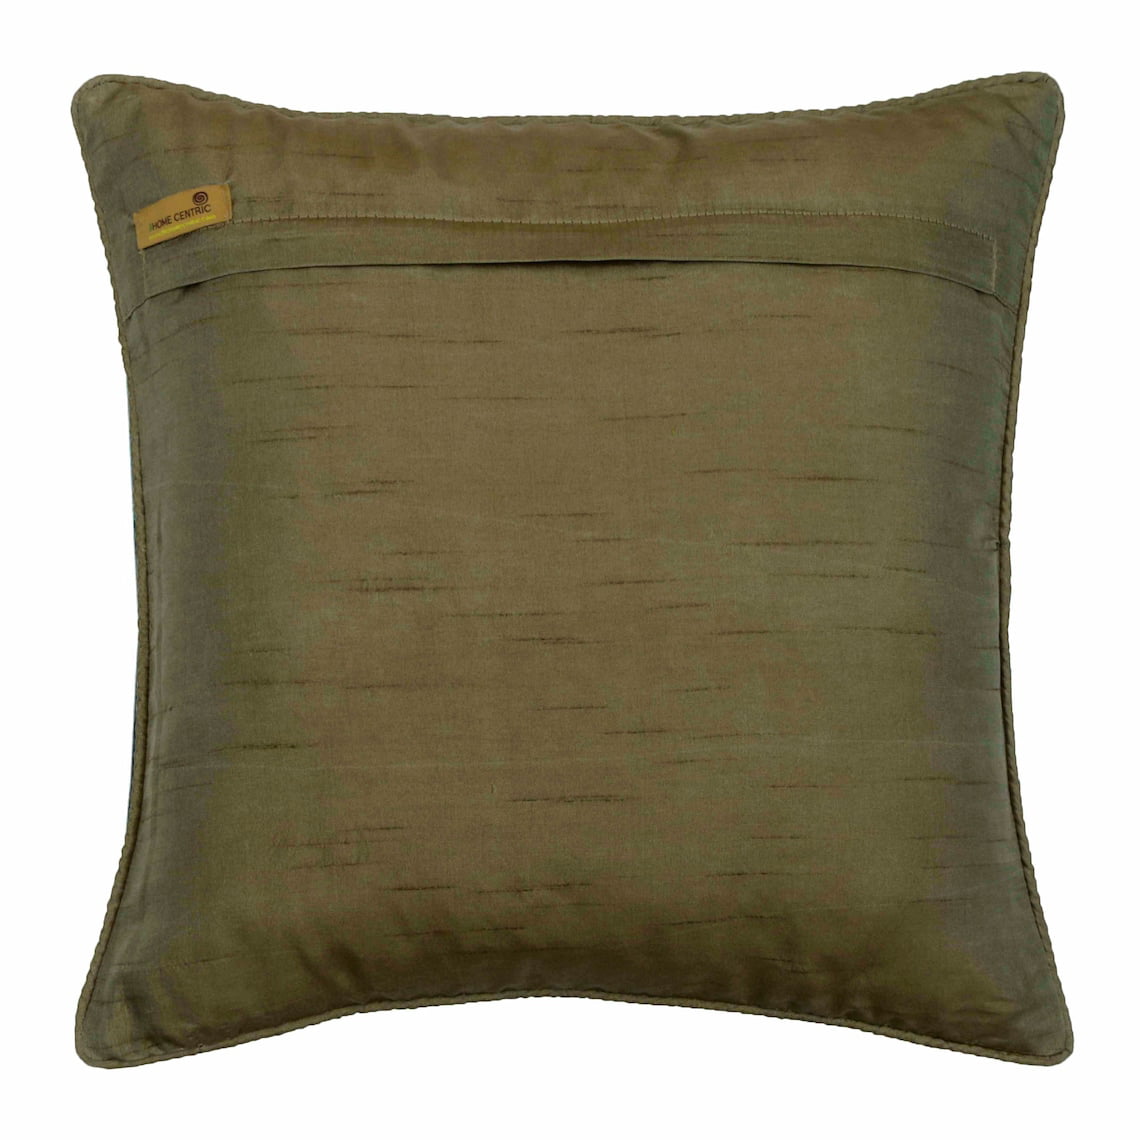 Velvet Decorative Throw Pillow Cover Medallion Embroidered Couch Sofa Bed  Pillow 24x24 Grey Gold Pillow, Silver Pillow Cover 24x24 inch (60x60 cm),  Contemporary, Abstract - Gold Plated 